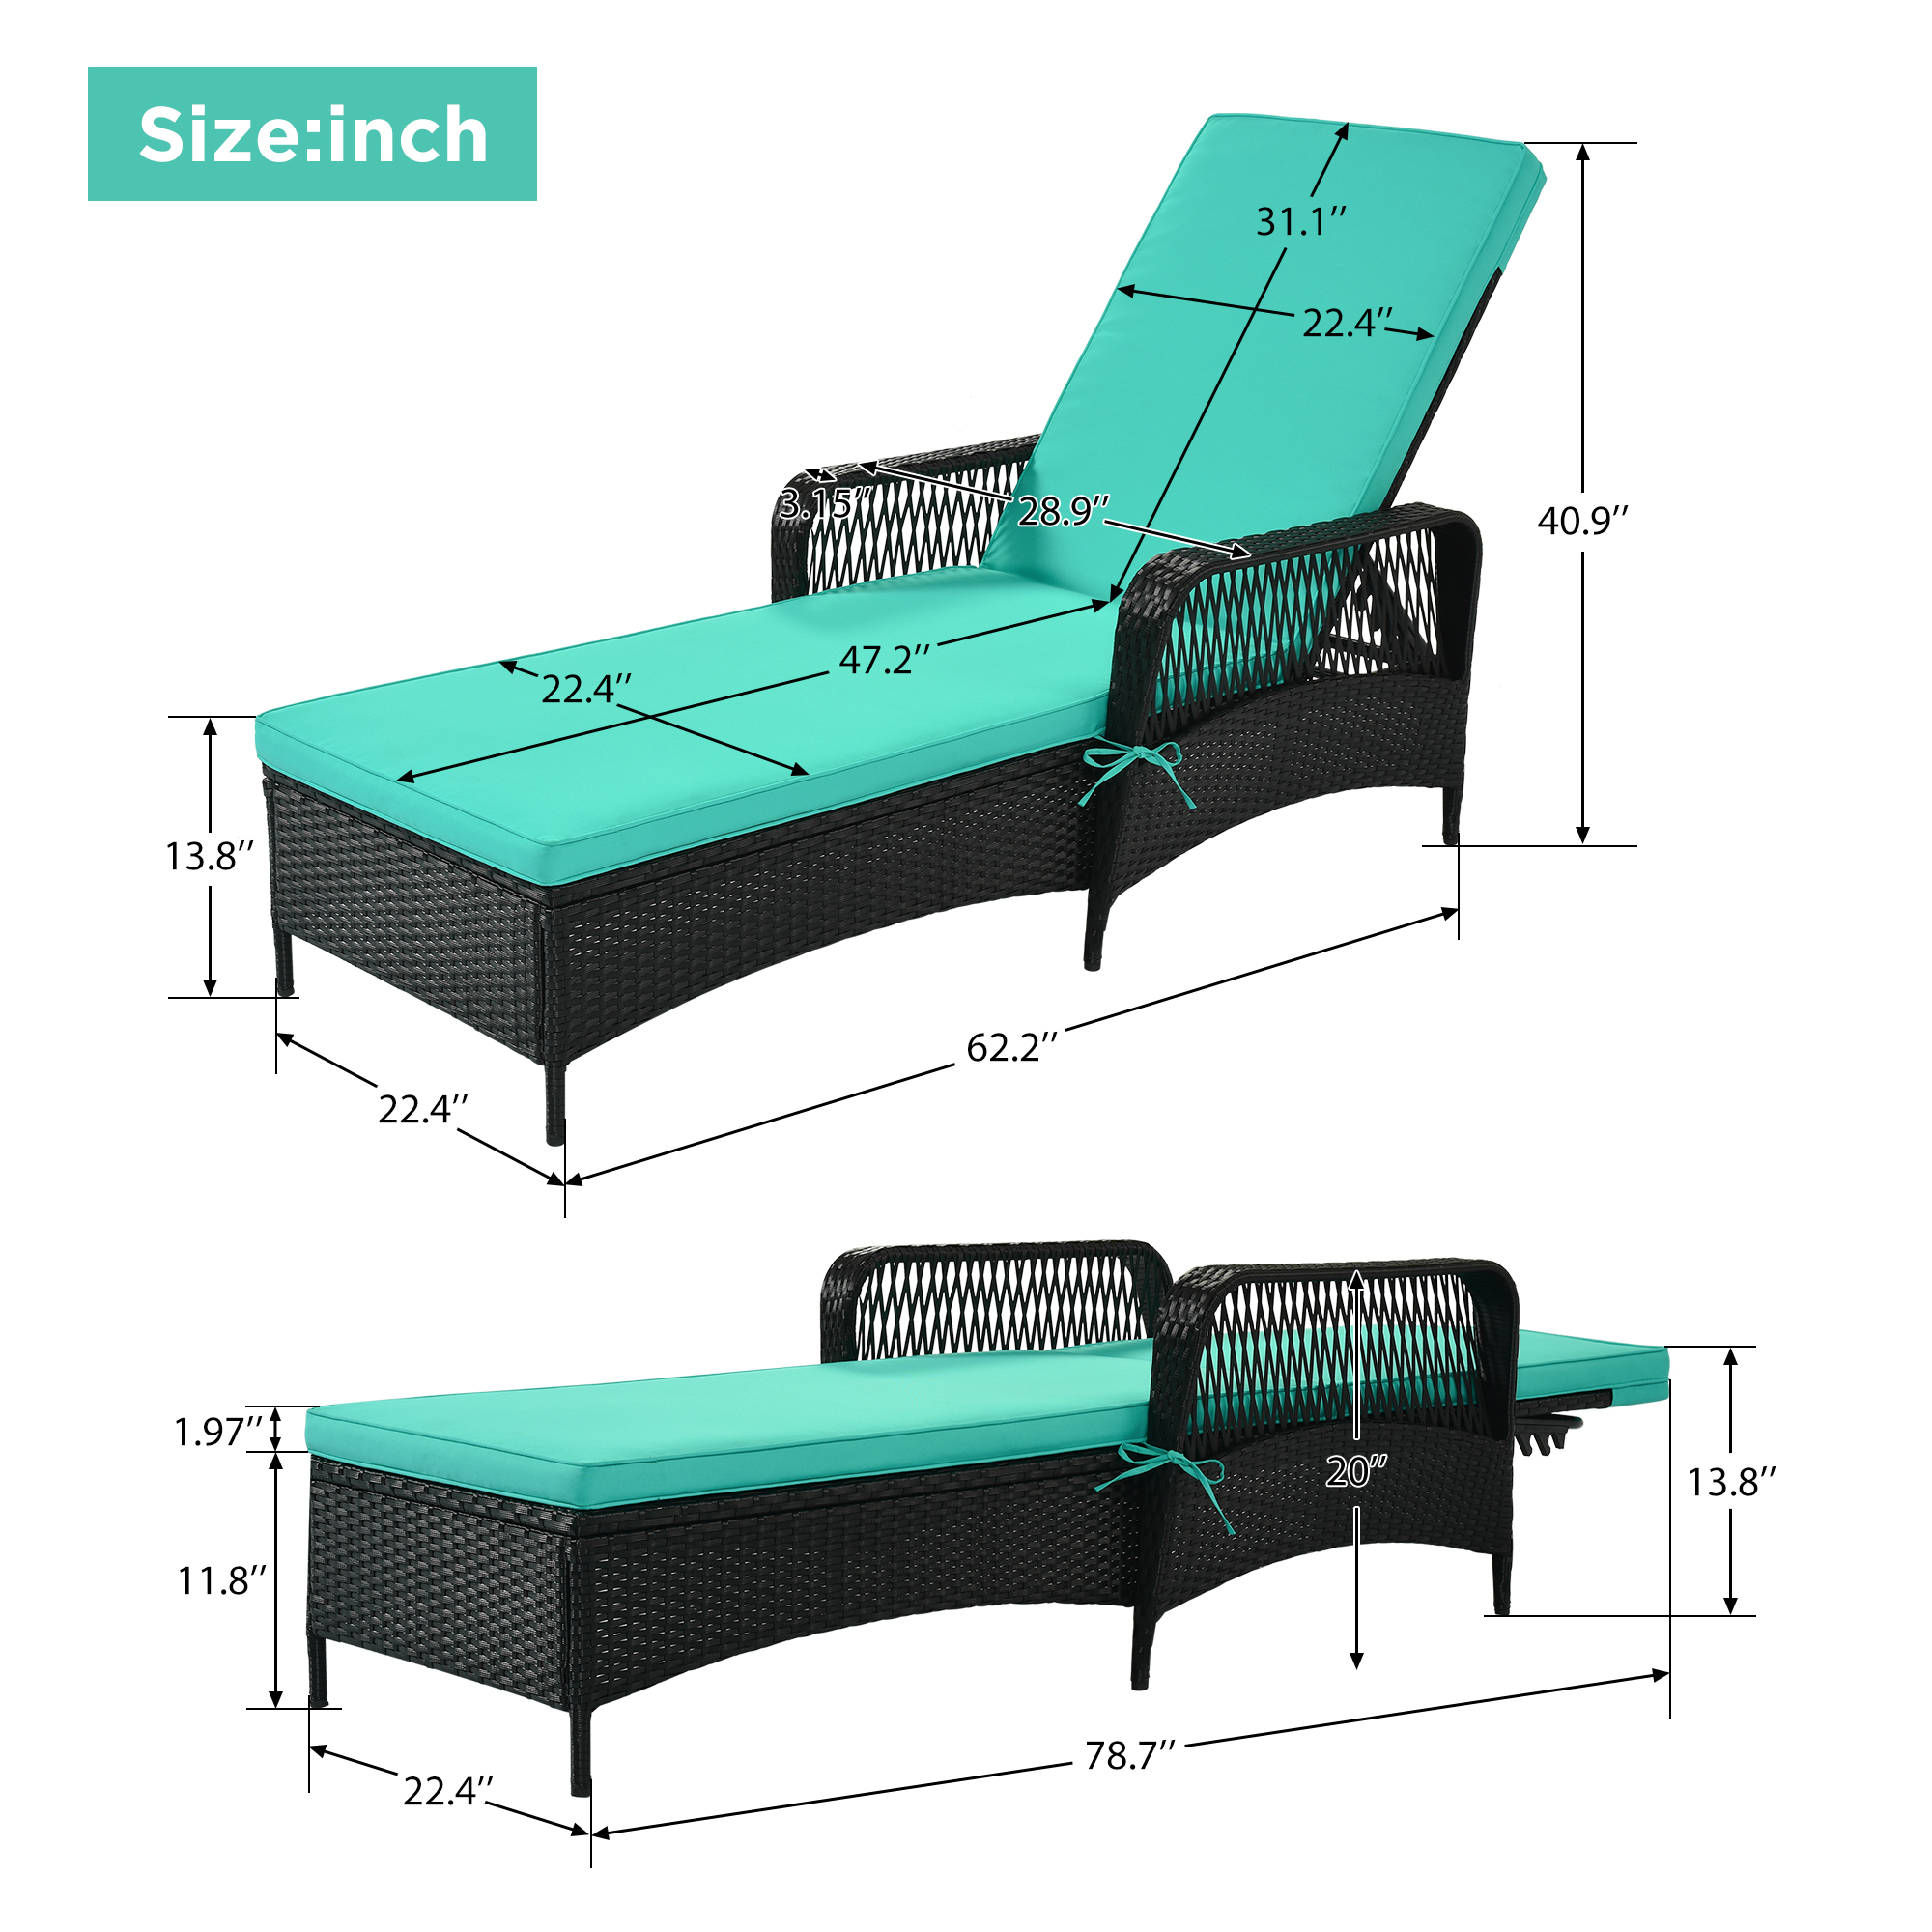 SYNGAR Patio Lounge Chair, Patio Chaise Lounges with Thickened Cushion, PE Rattan Steel Frame Pool Lounge Chair for Patio Backyard Porch Garden Poolside, Green - image 5 of 10